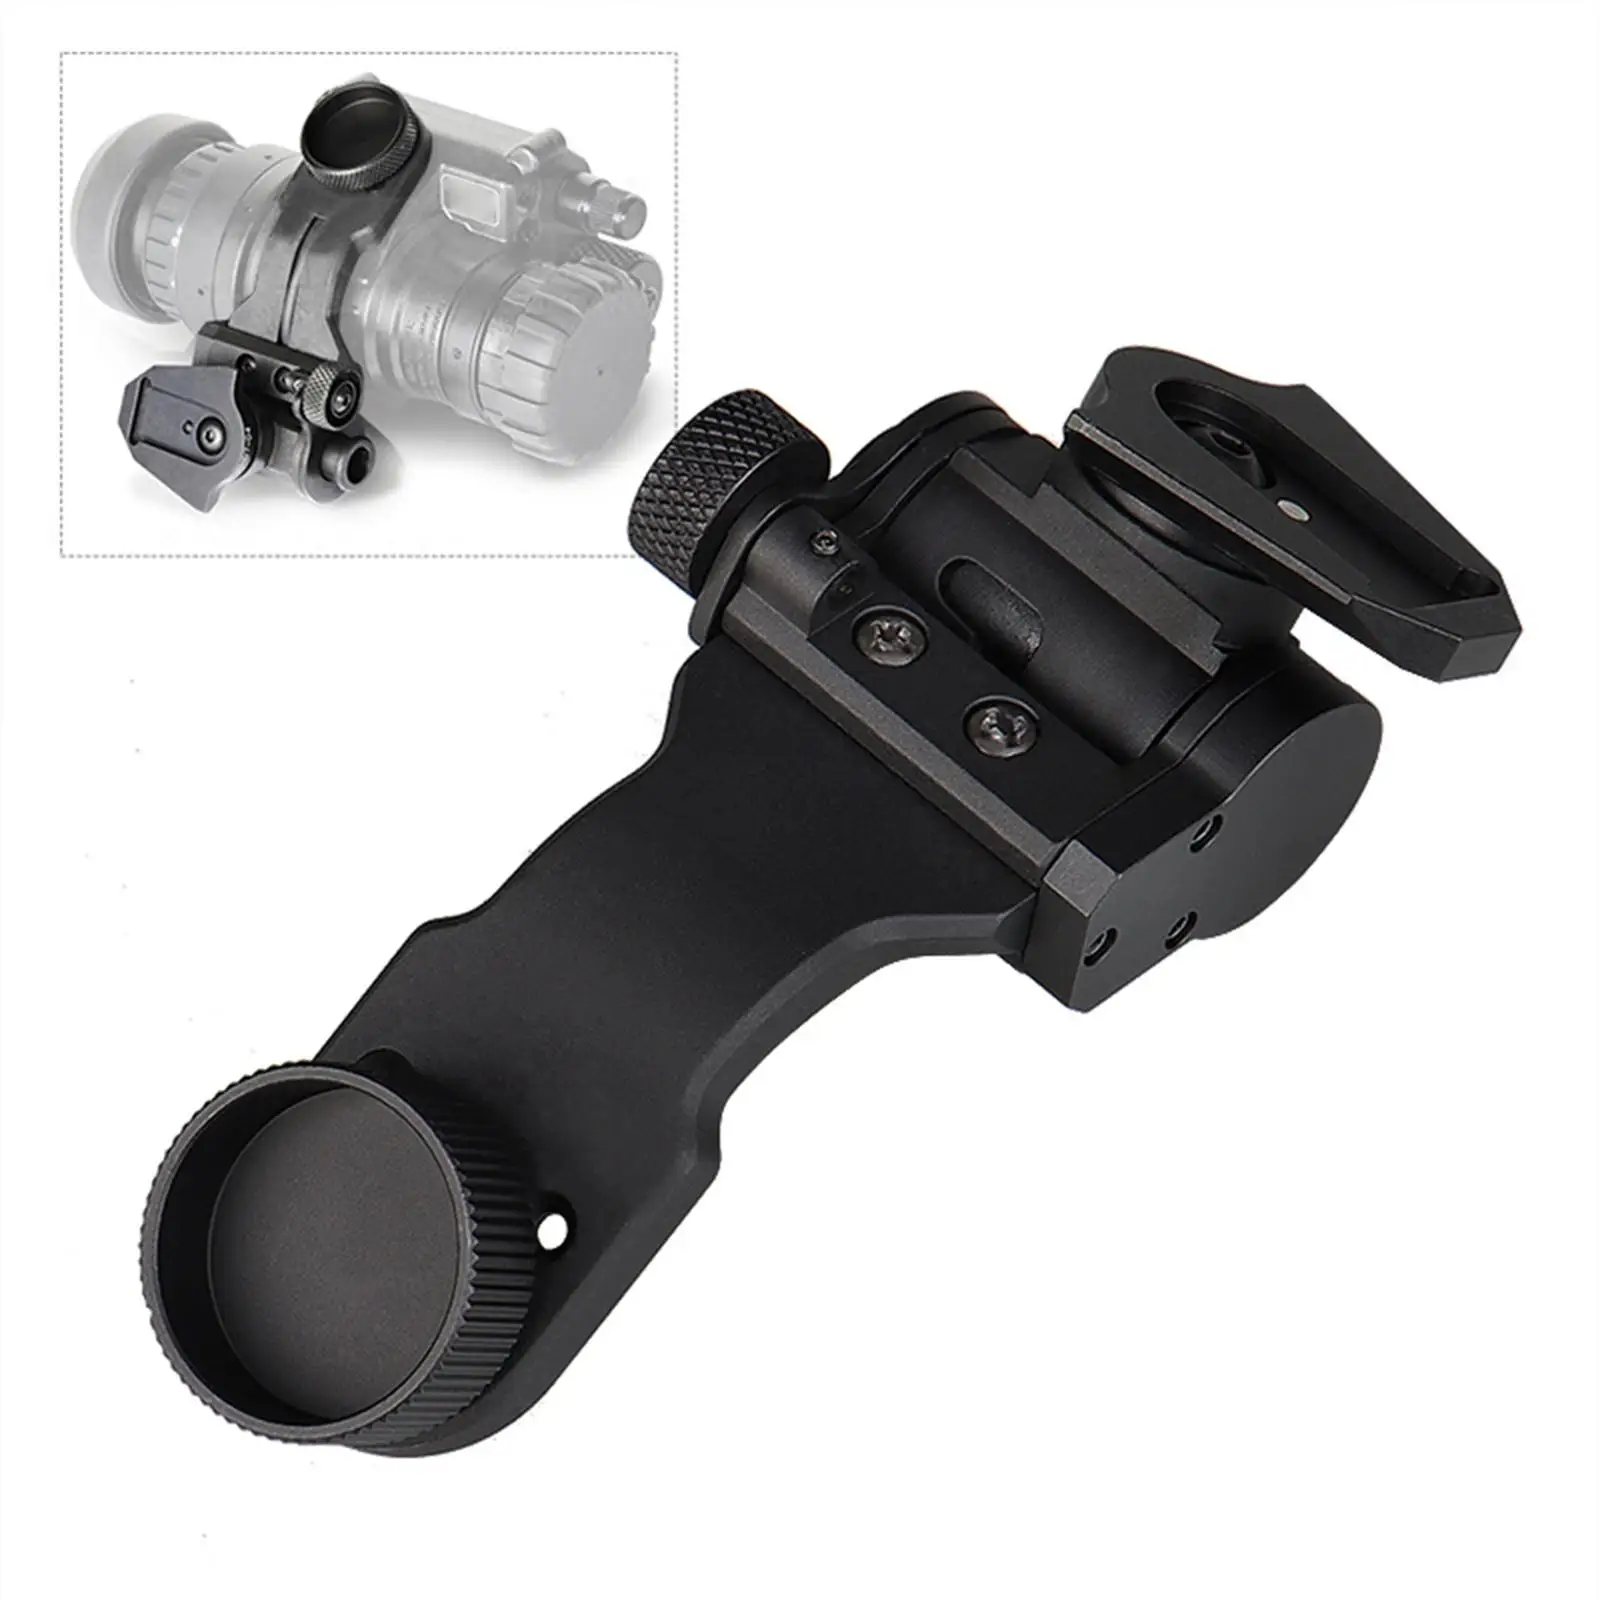 Outdoor Hunting J Arm Adapter Nvg Simple to Inatall Lightweight Durable Helmets